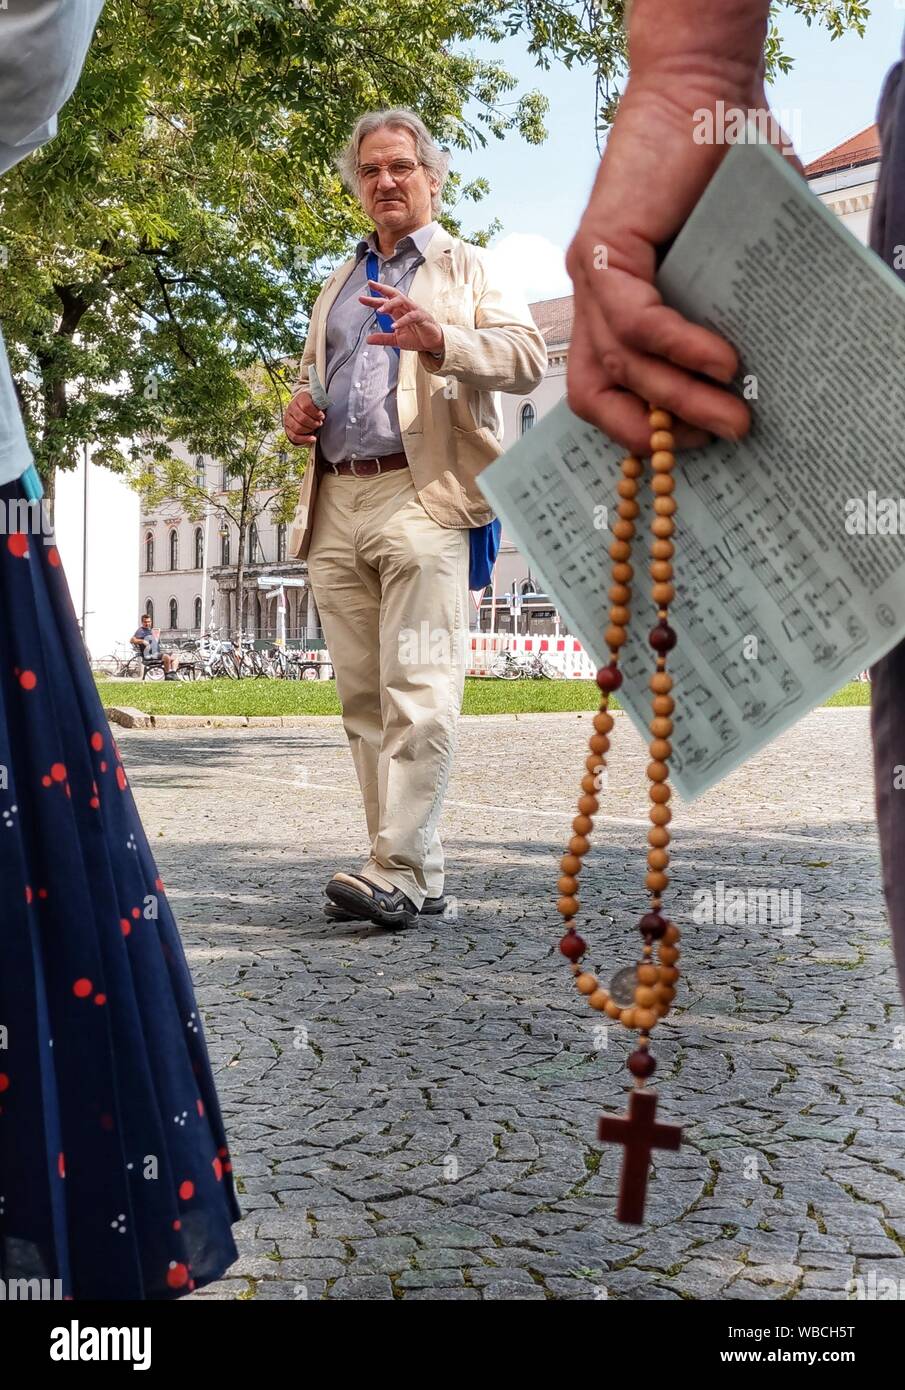 Munich, Bavaria, Germany. 26th Aug, 2019. Anti-abortion activist WOLFGANG HERRING holds a vigil with rosary beads visible in the foreground. Headed by well-known anti abortion activist Wolfgang Herring, a small group of Christian anti-abortion activists marched through the city of Munich, protesting against the Pro Familia organization who offers counseling services for pregnant women, ultimately ending at the Ludwig Maximilian University's Geschwister Scholl Platz. Credit: Sachelle Babbar/ZUMA Wire/Alamy Live News Stock Photo